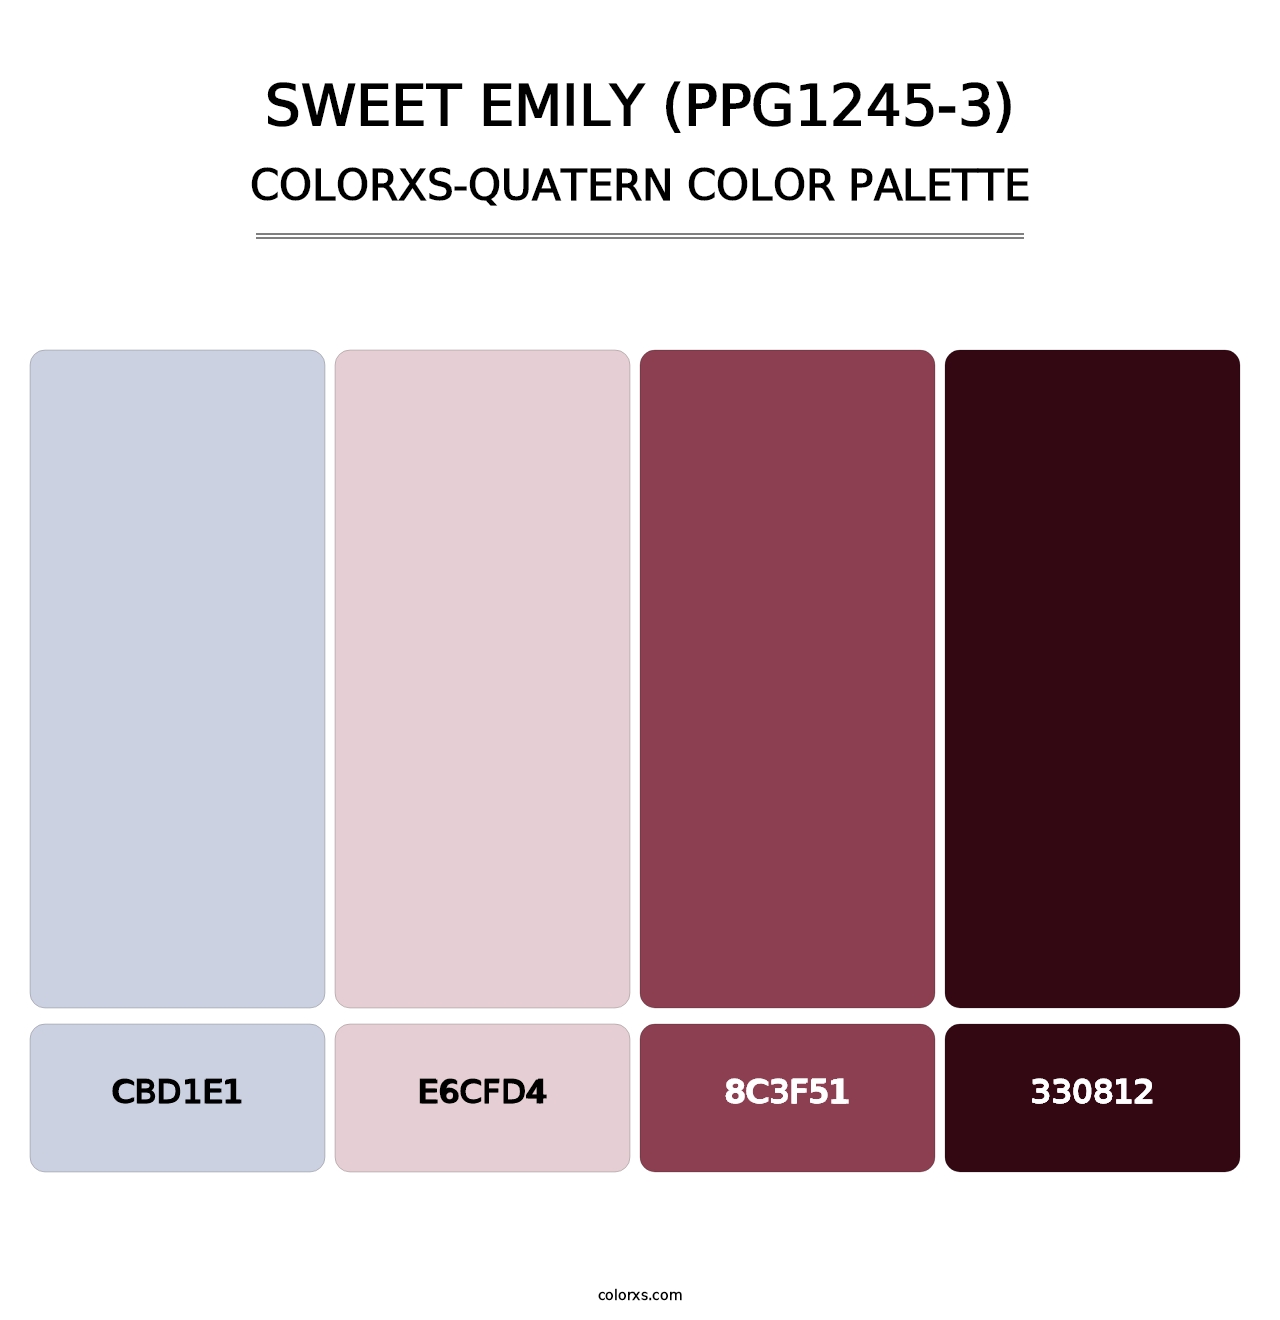 Sweet Emily (PPG1245-3) - Colorxs Quatern Palette